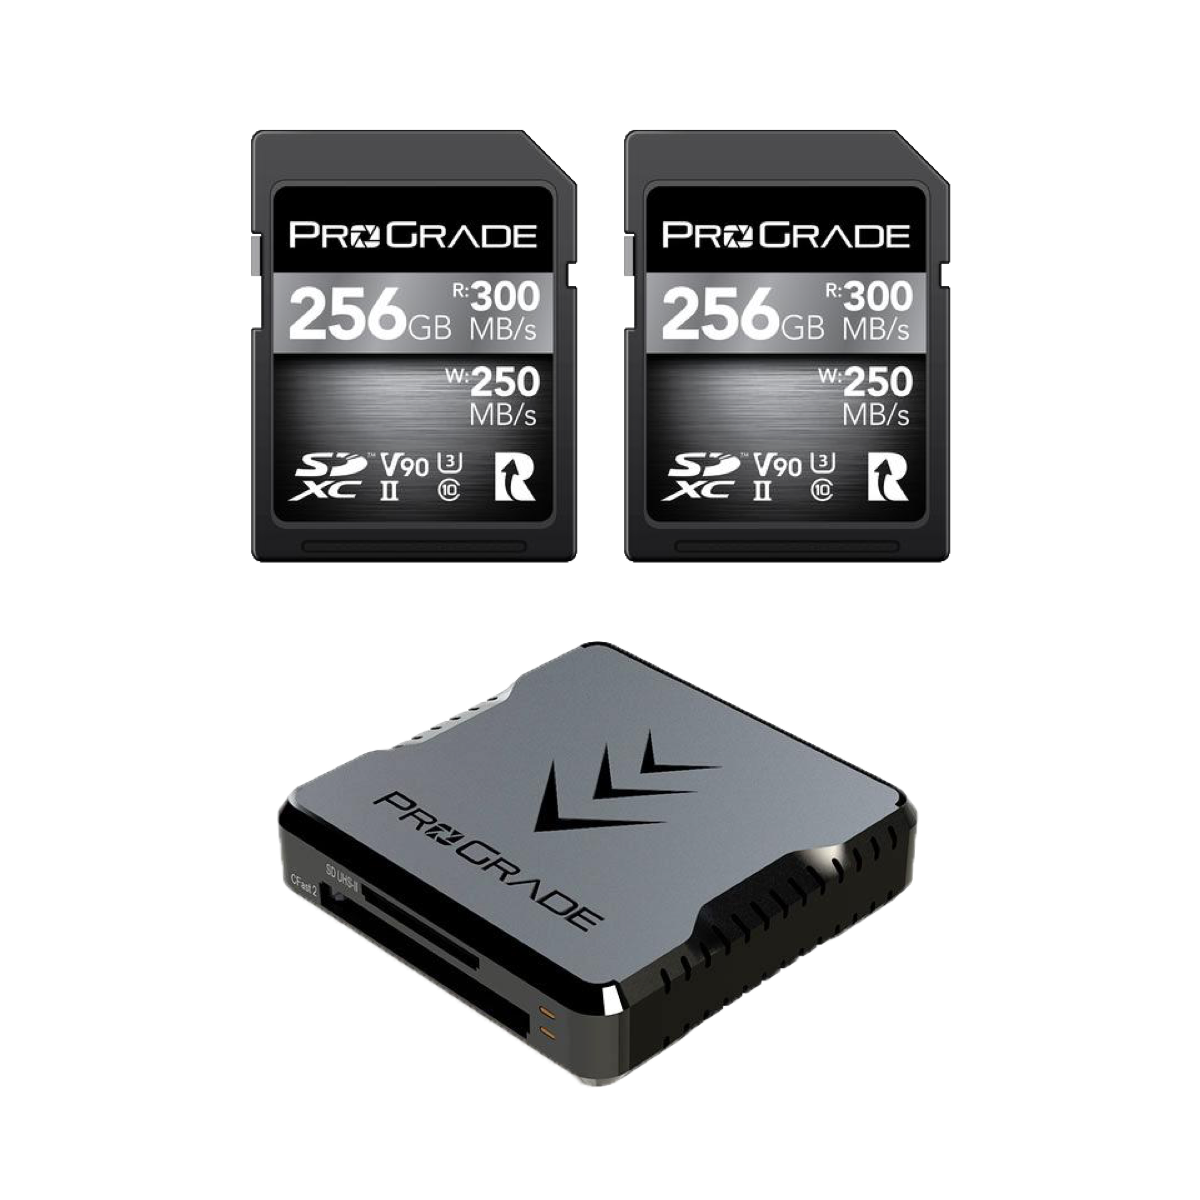 Wise Advanced 128, 256 and 512GB SD Cards with V90 Video Speed Class  Introduced